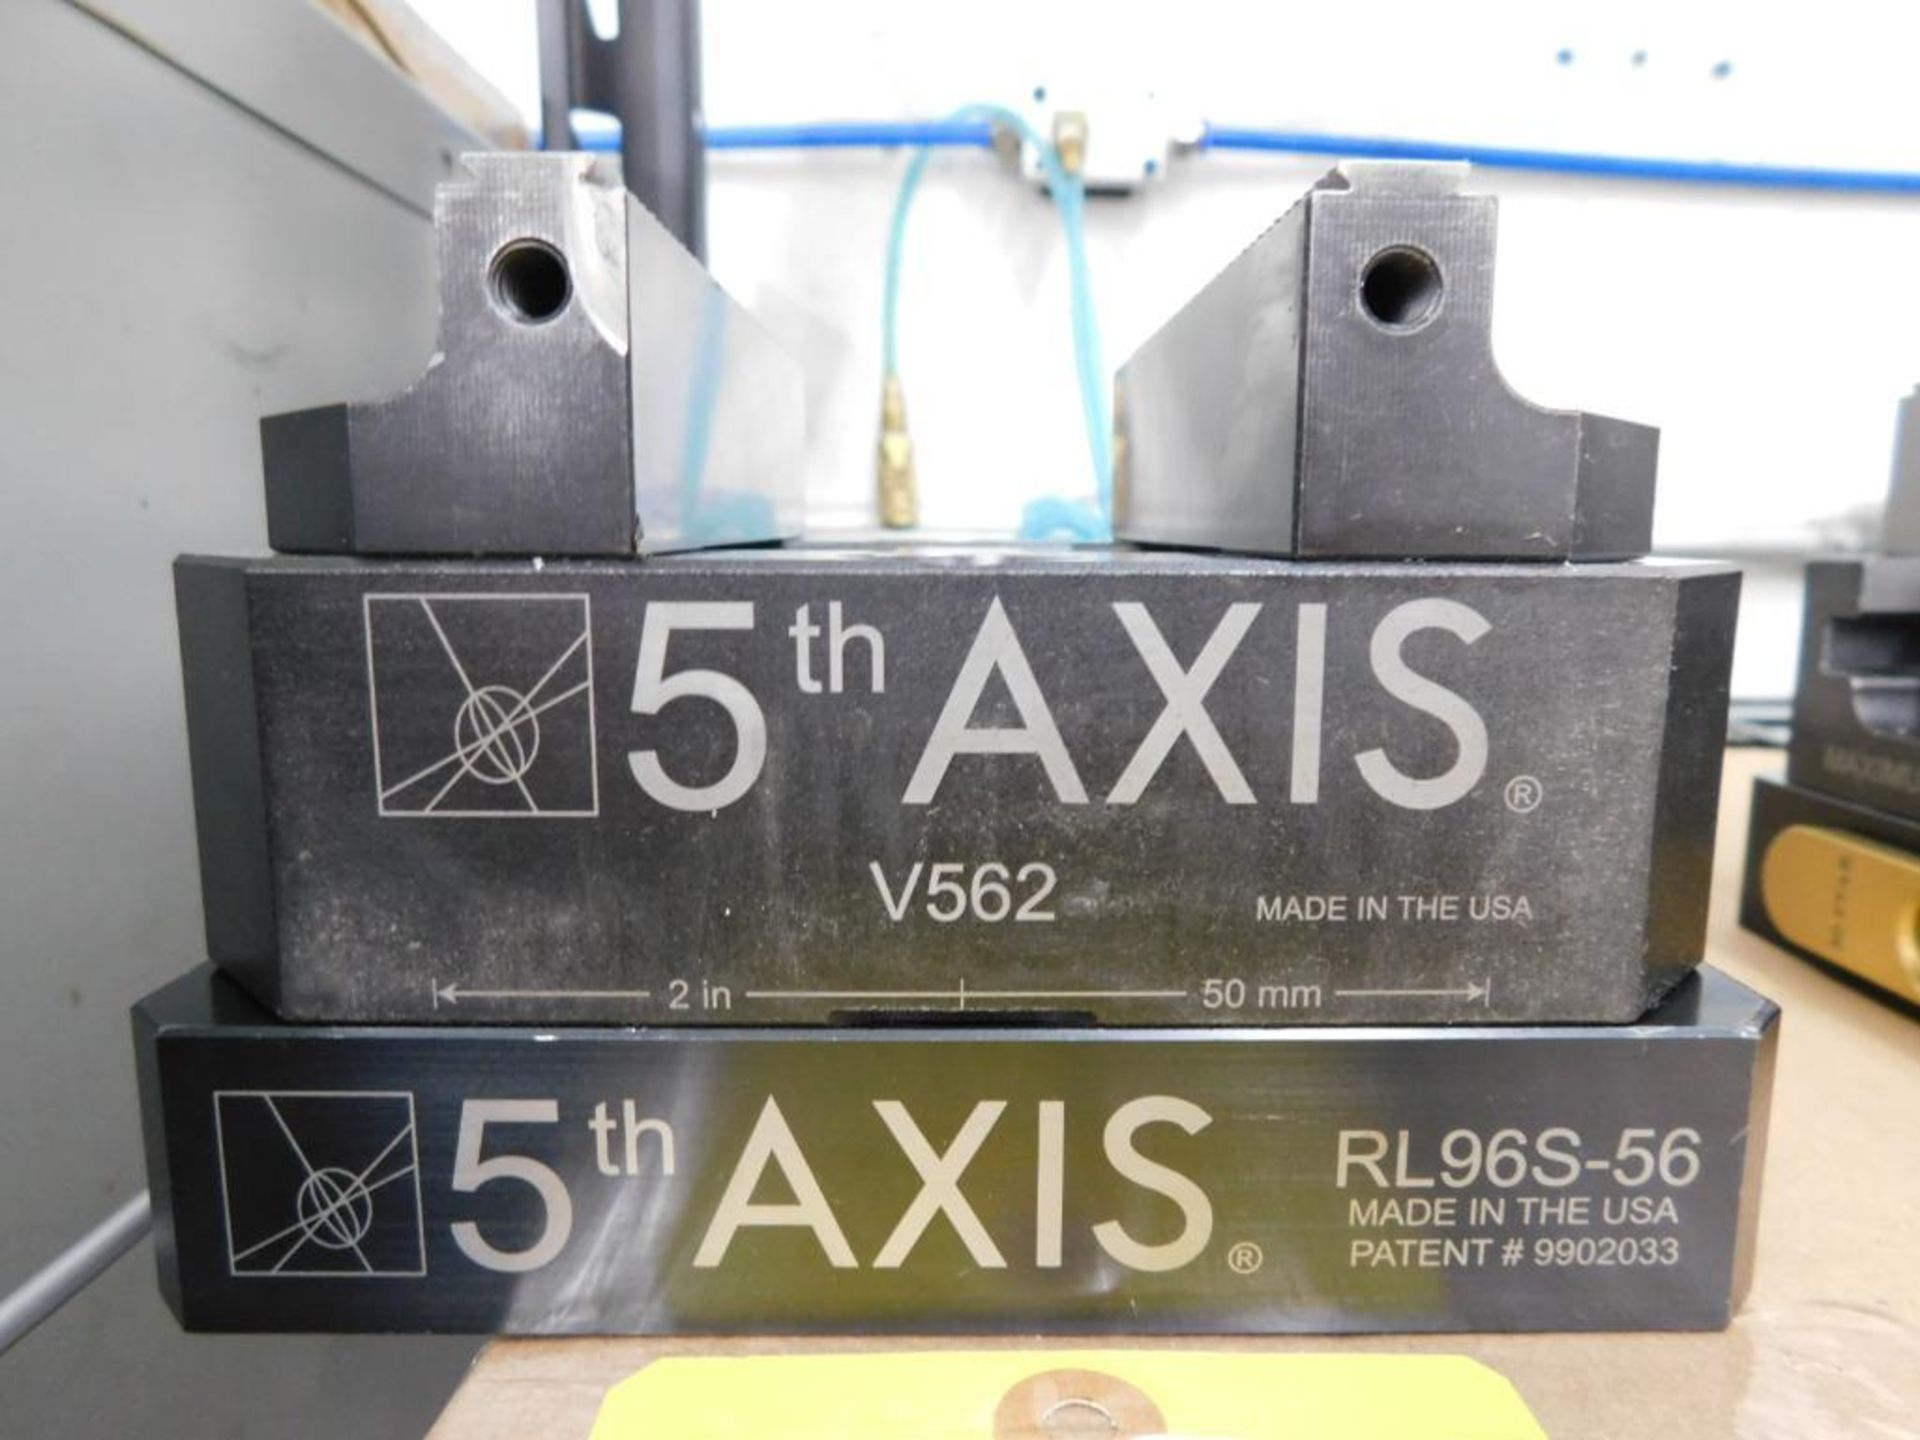 5th Axis V562 Machine Vise w/RL96A-56 Plate - Image 4 of 4